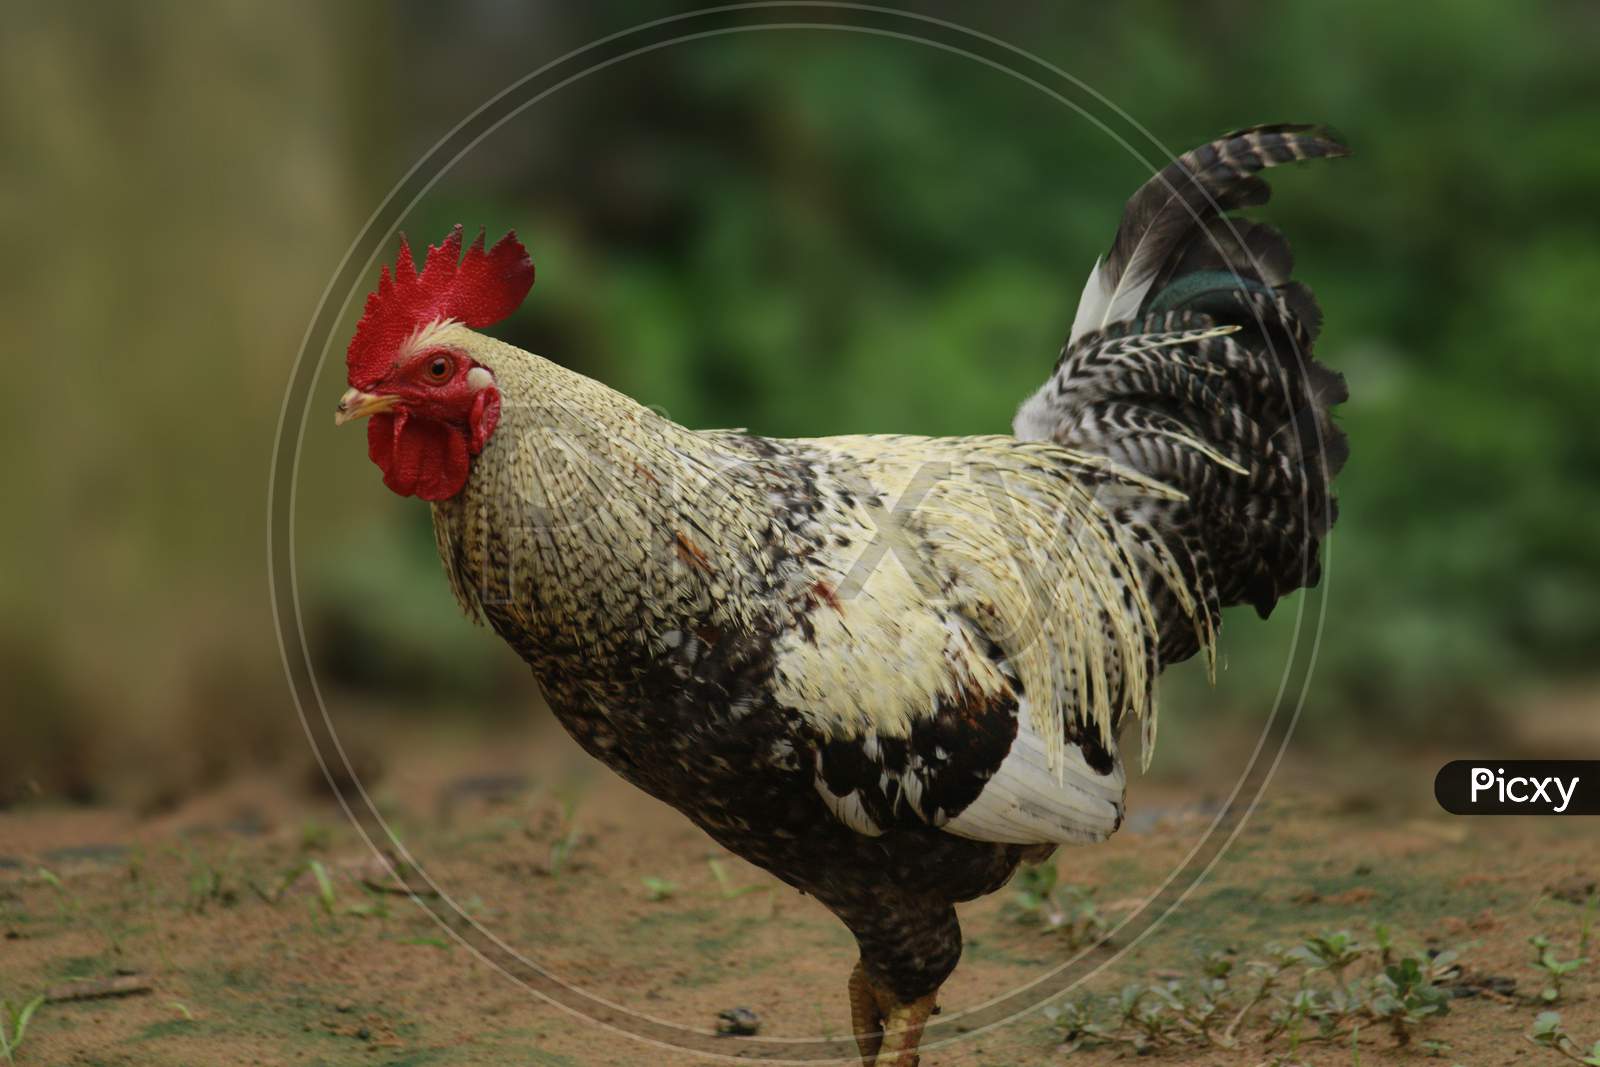 Local Rooster walking on ground